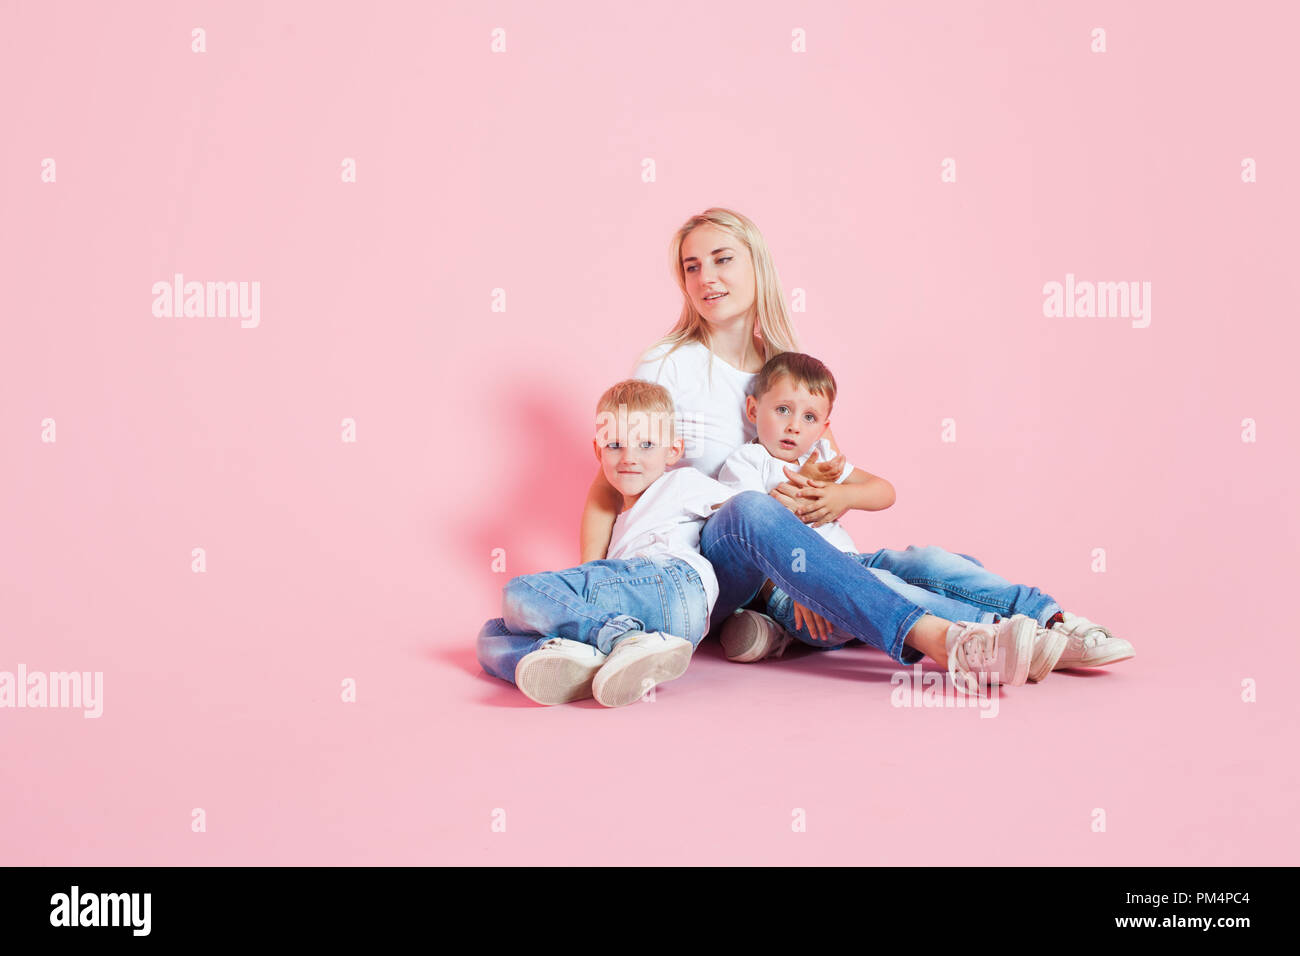 happy mom with two happy sons. Young woman and two baby boys, pink background Stock Photo